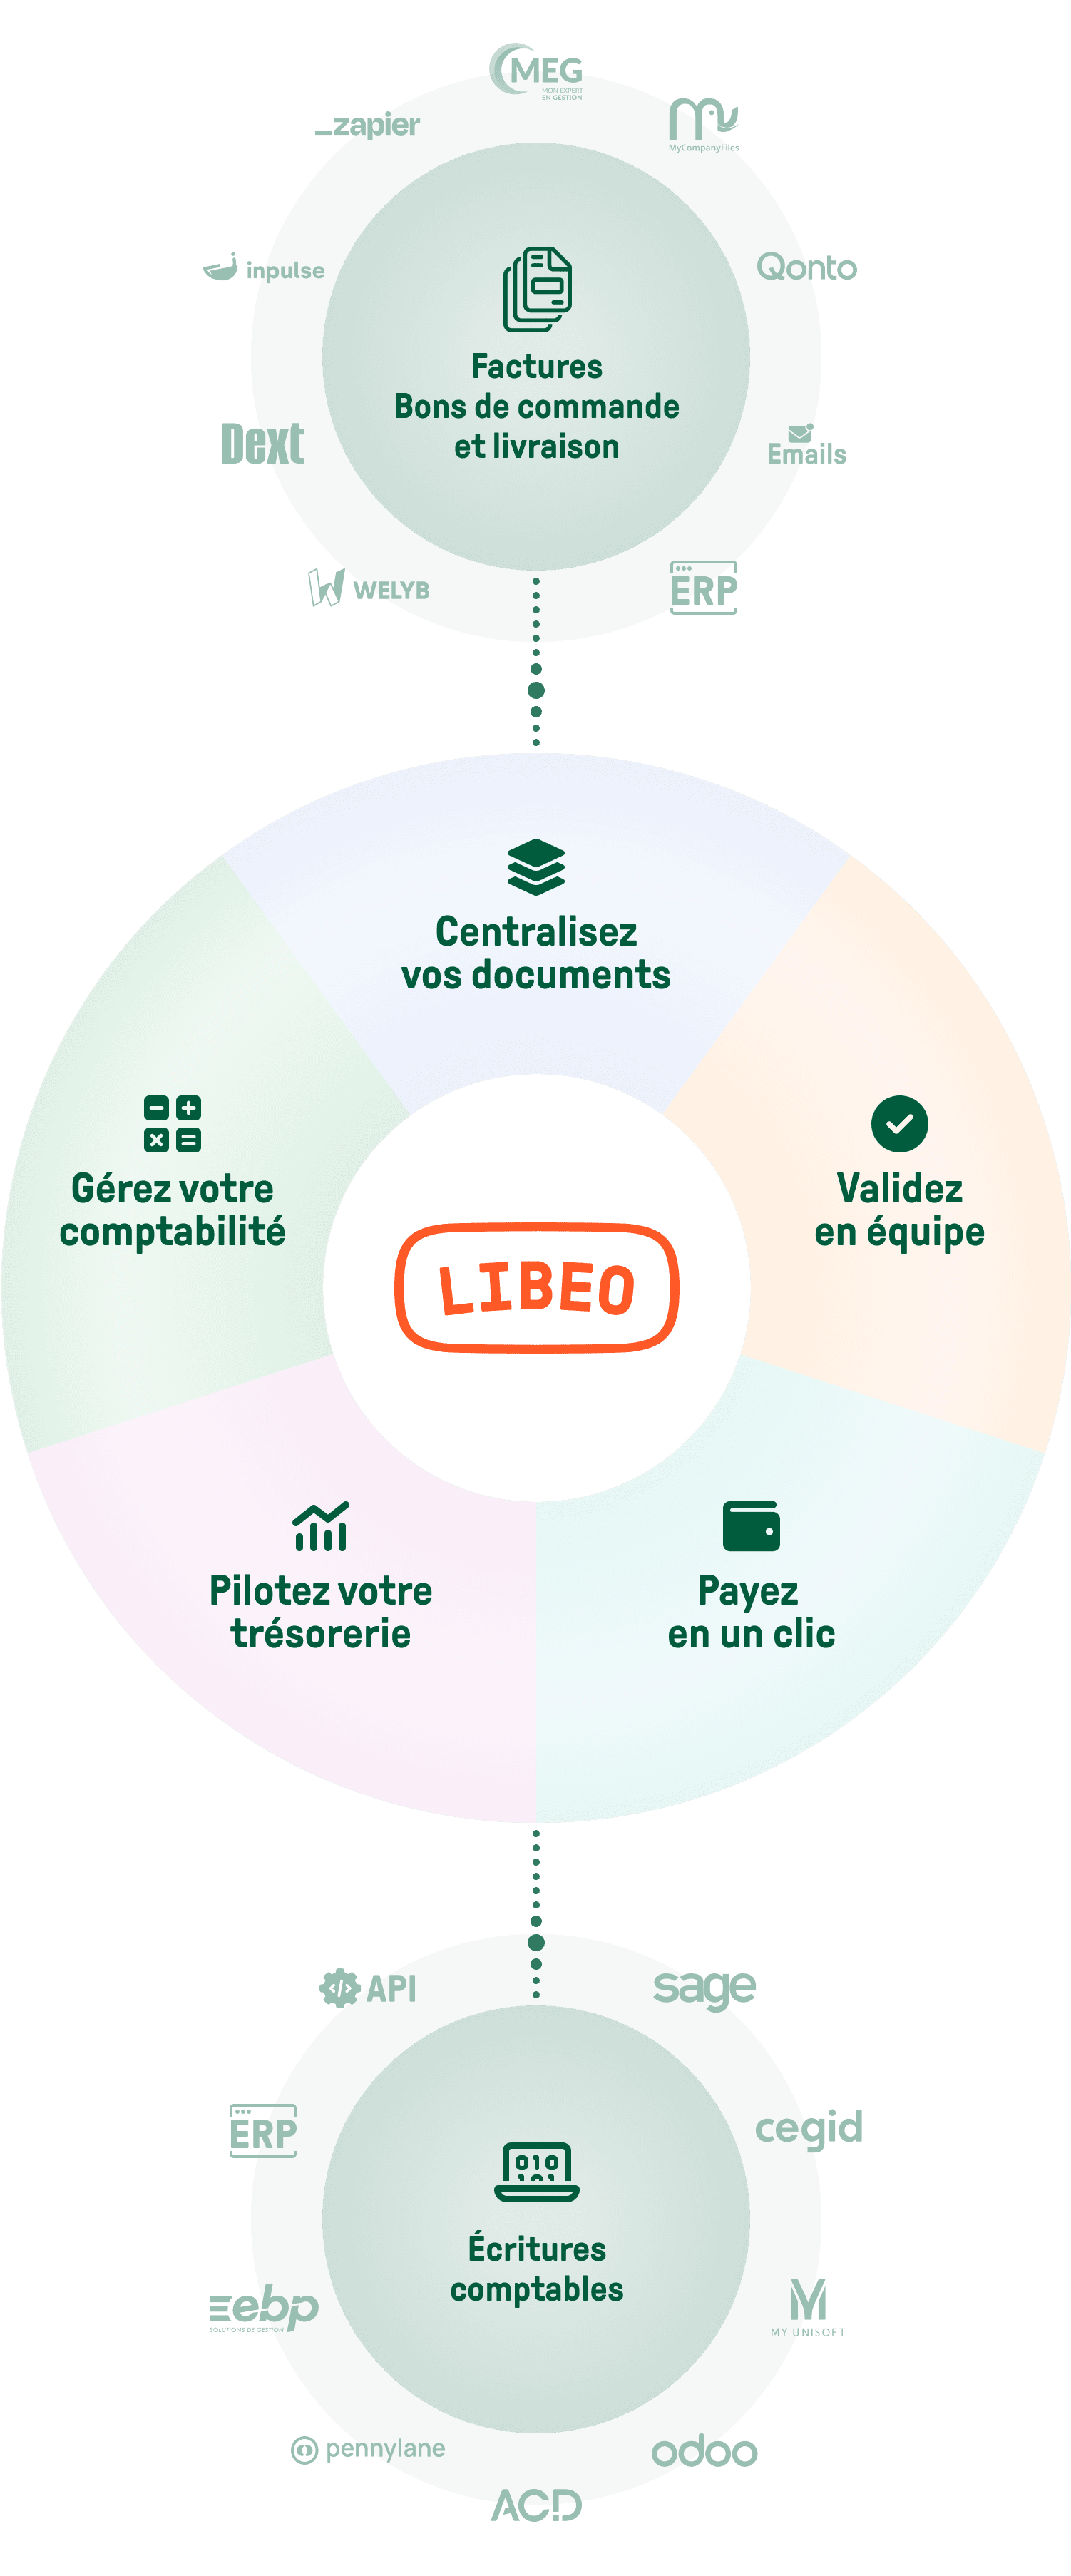 libeo-infography_vertical